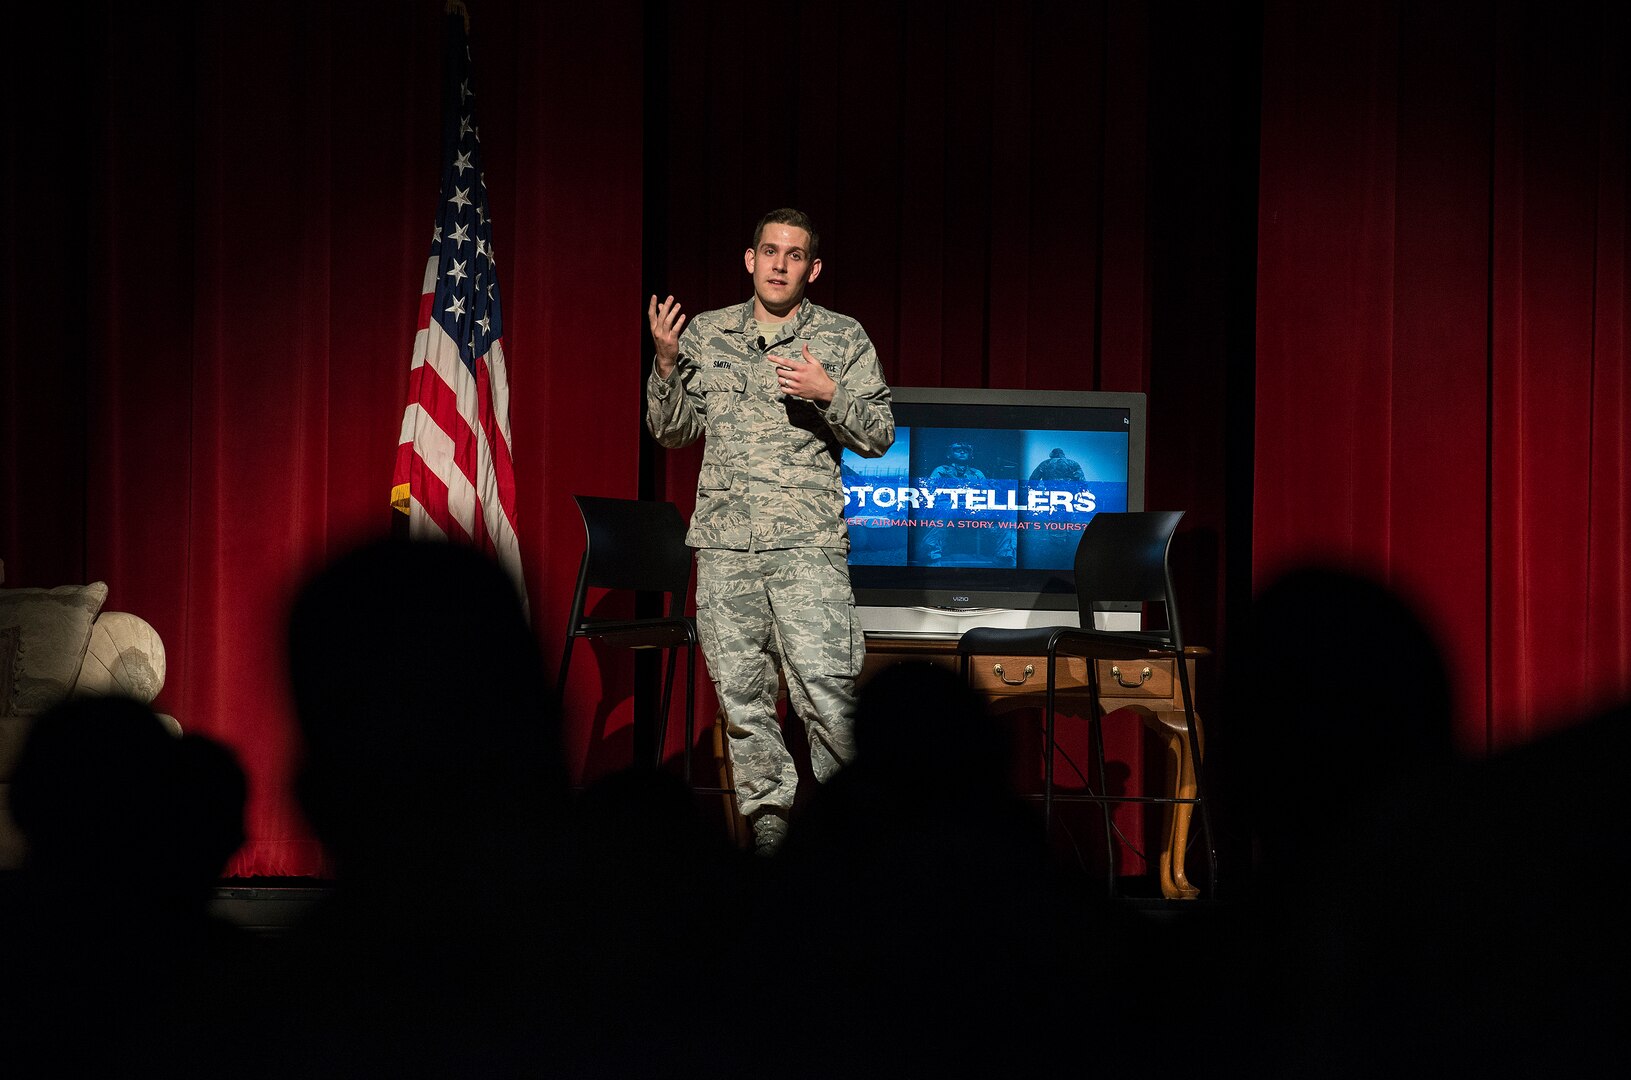 Staff Sgt. Jared Smith, 93rd IS cryptologic language analyst, shares his life experiences Jan. 19, 2016, at Arnold Hall at Joint Base San Antonio-Lackland, Texas. Smith was one of six participants to share tales of hardship and resiliency as part of the JBSA-Lackland’s first-ever “Storytellers” event. The “Storytellers” event was created to provide a forum where Airmen can share experiences and learn about one another promoting understanding throughout the force. (U.S. Air Force photo by Johnny Saldivar/Released)